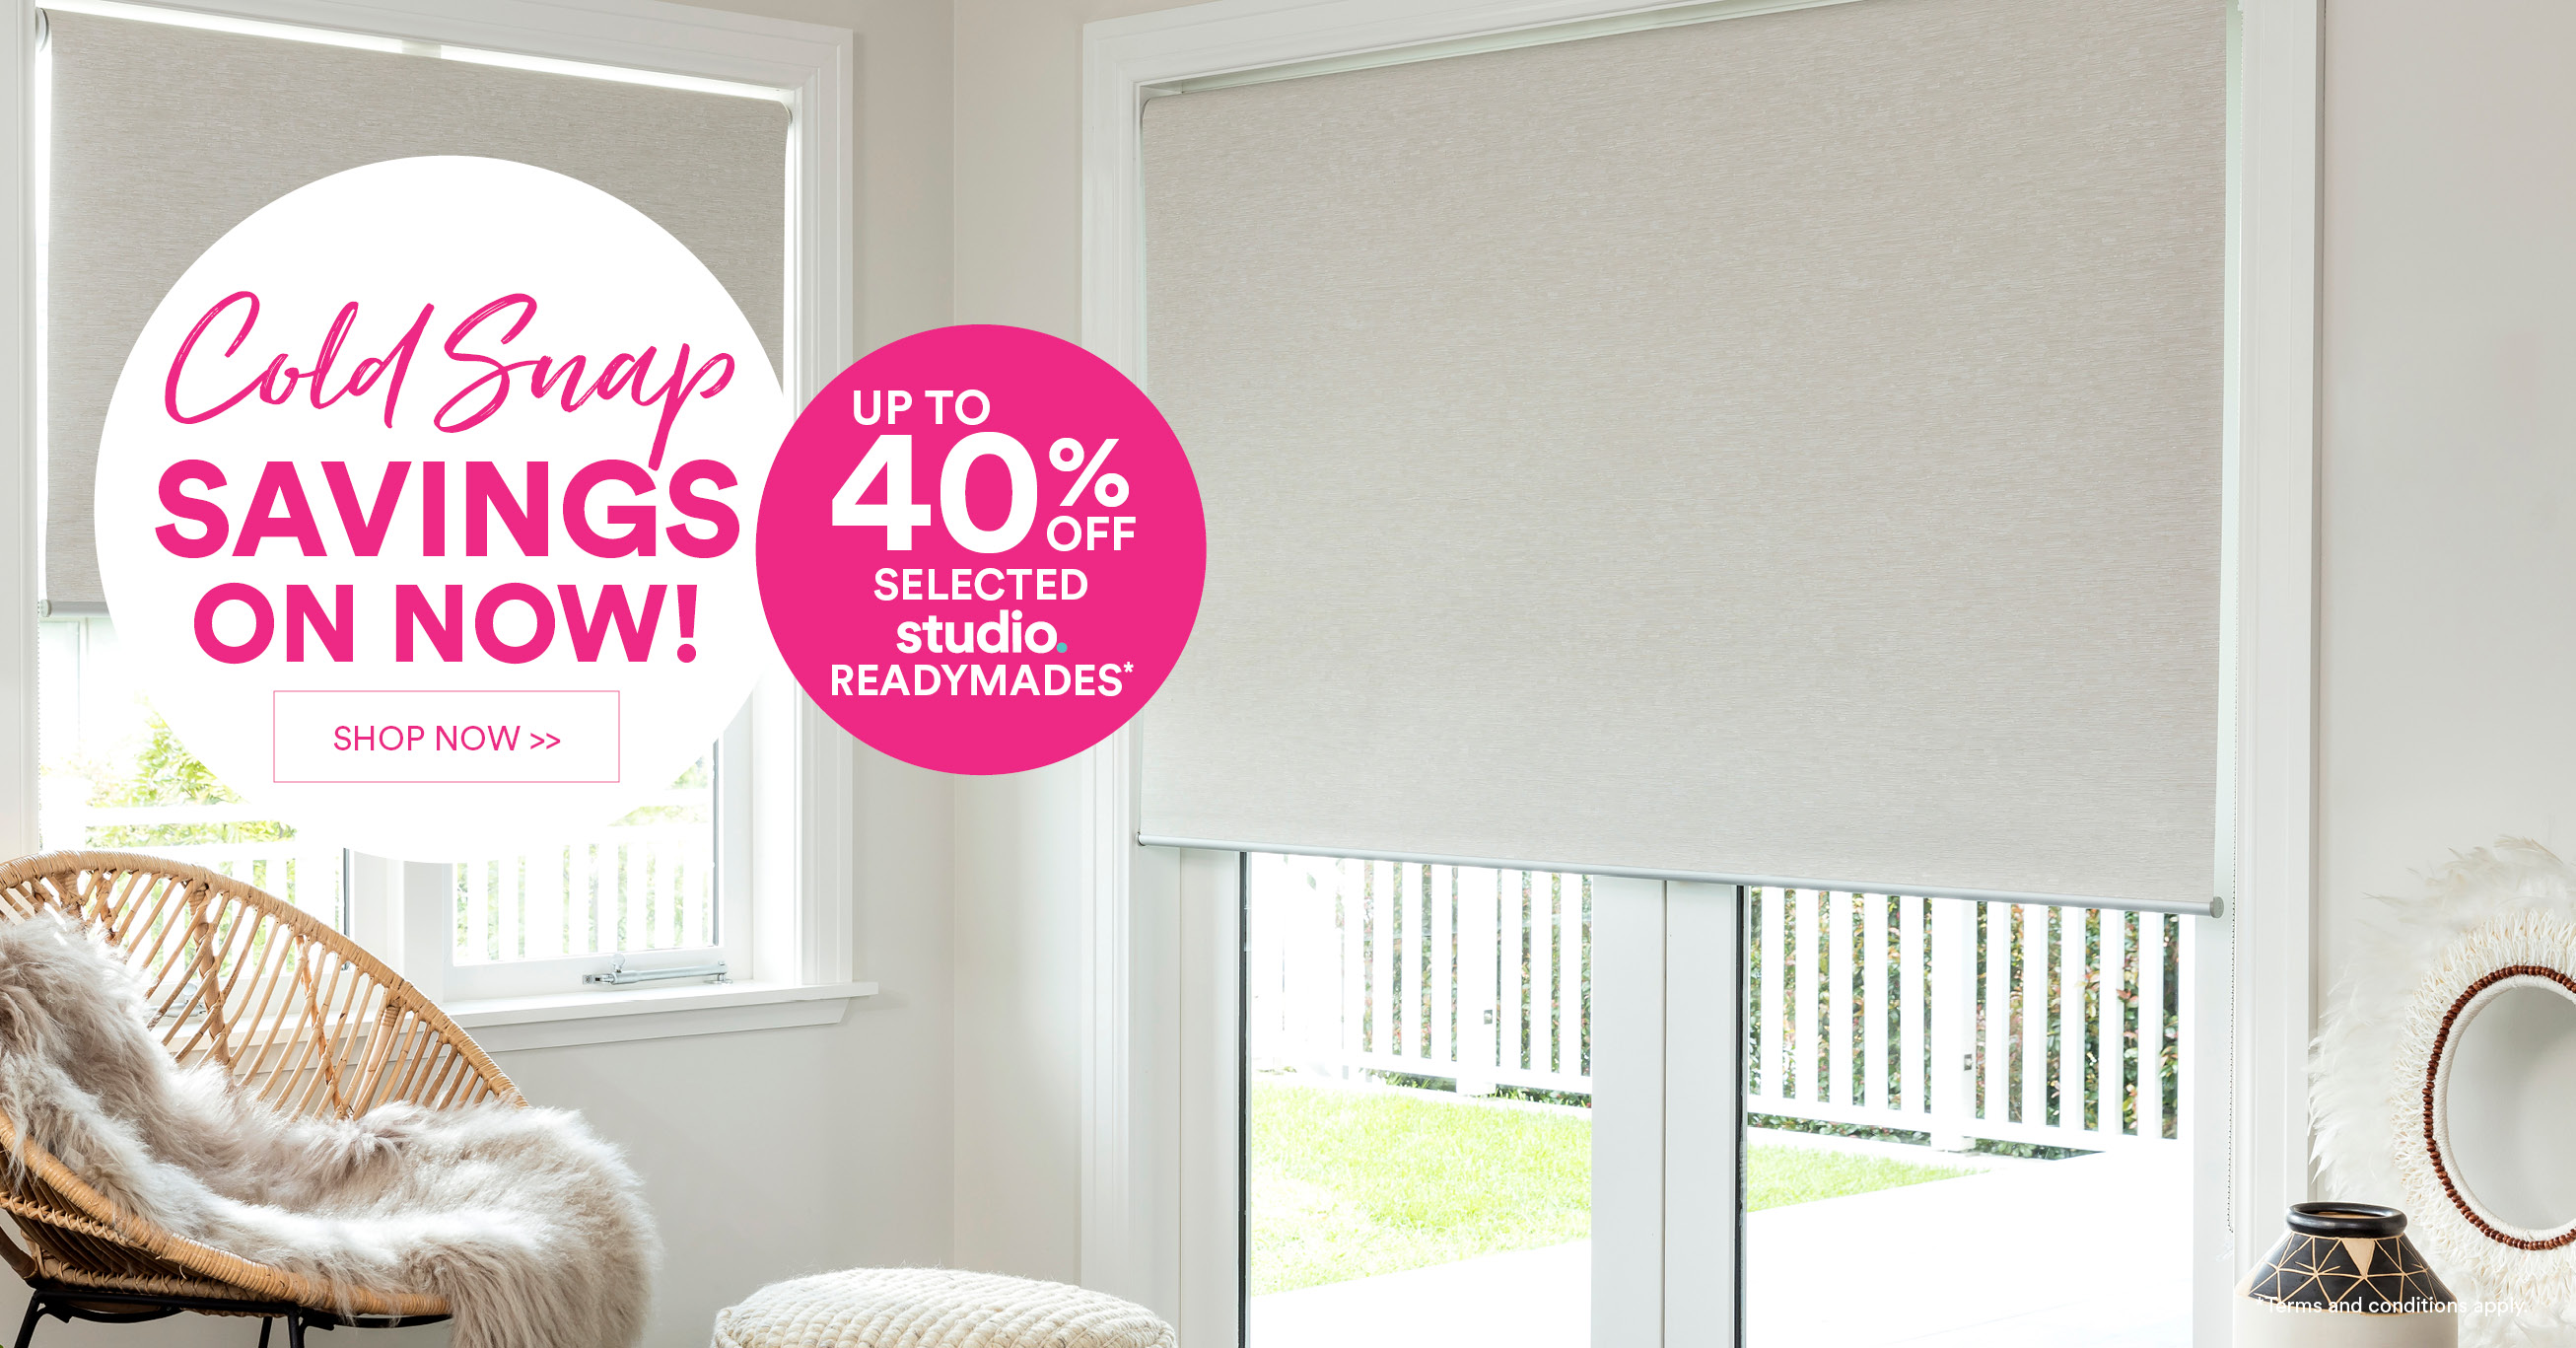 Up to 40% off selected Studio Readymades*